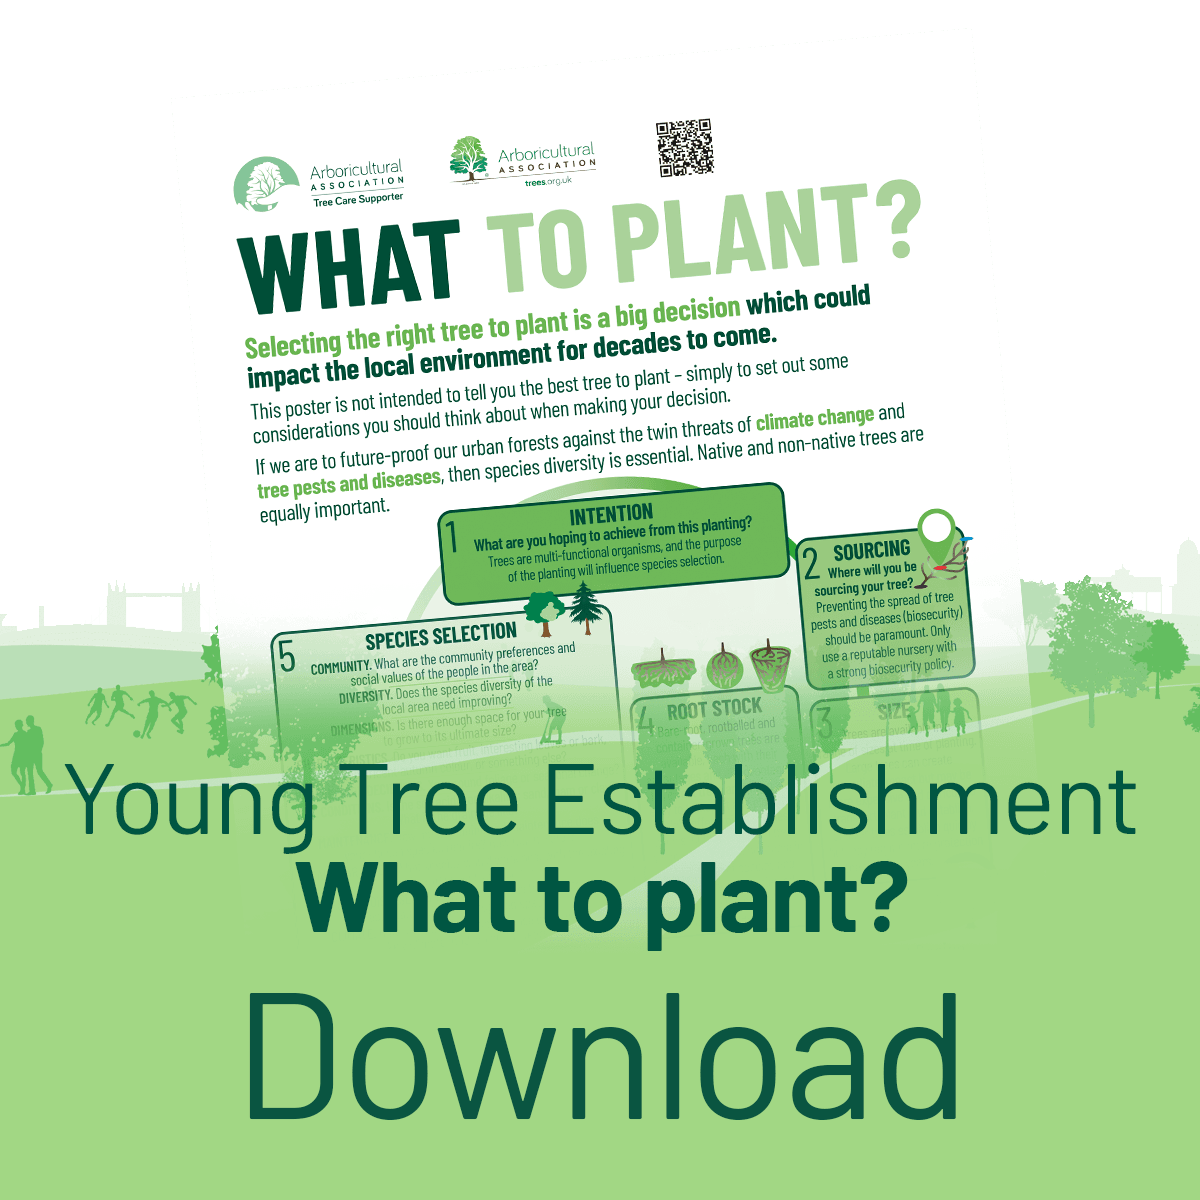 Download the Young Tree Establishment What to Plant? Poster